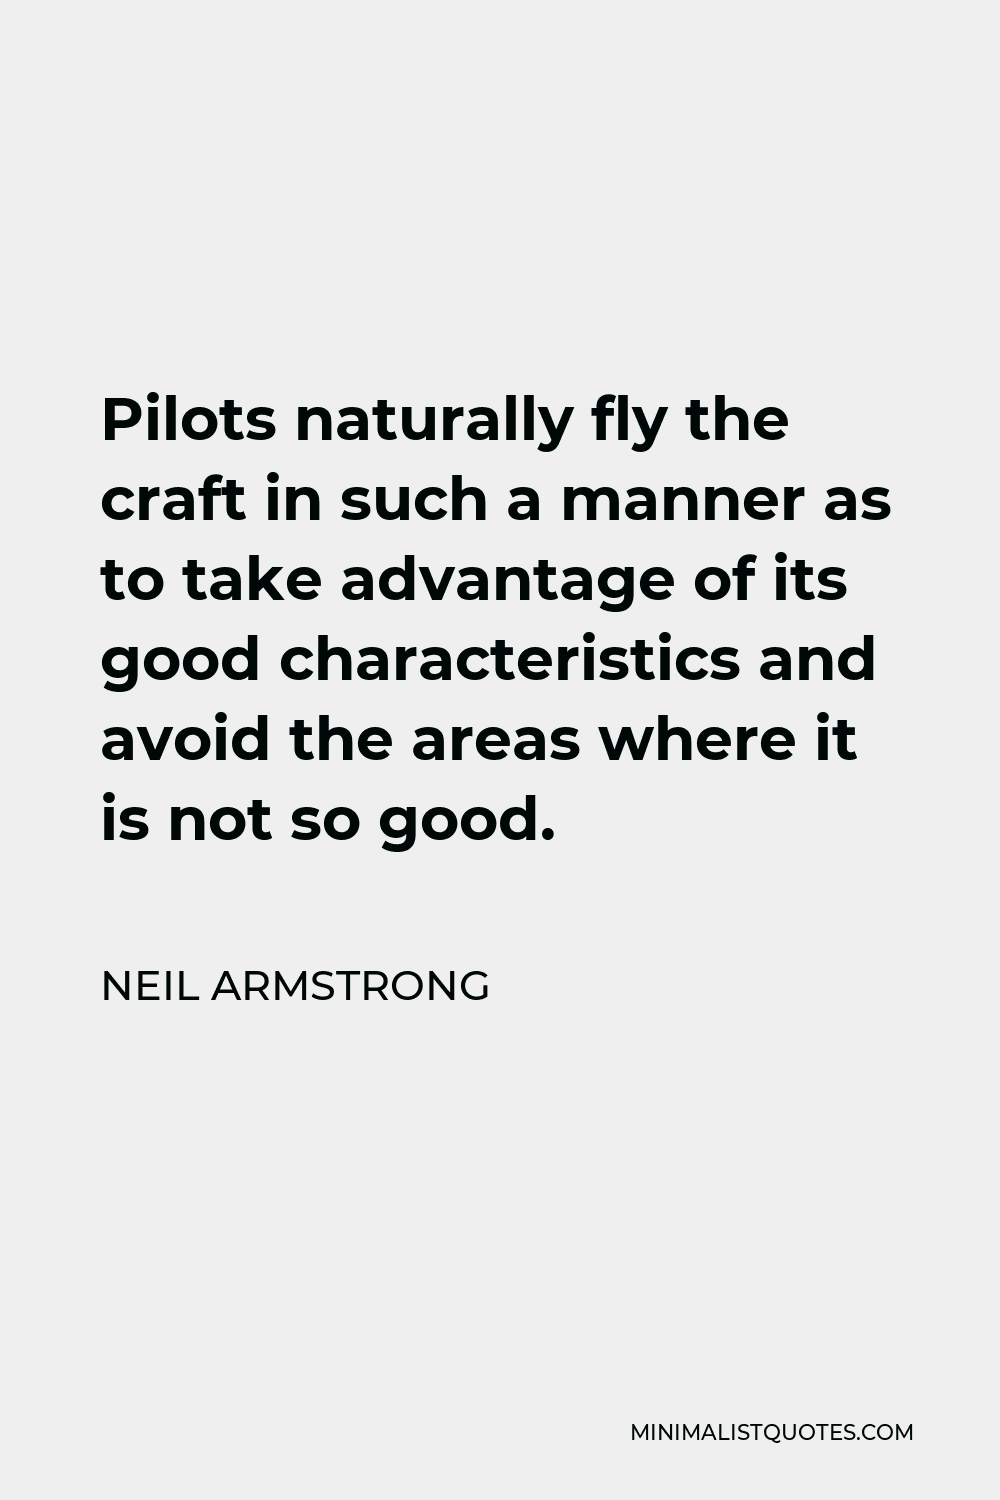 Neil Armstrong Quote - Pilots naturally fly the craft in such a manner as to take advantage of its good characteristics and avoid the areas where it is not so good.